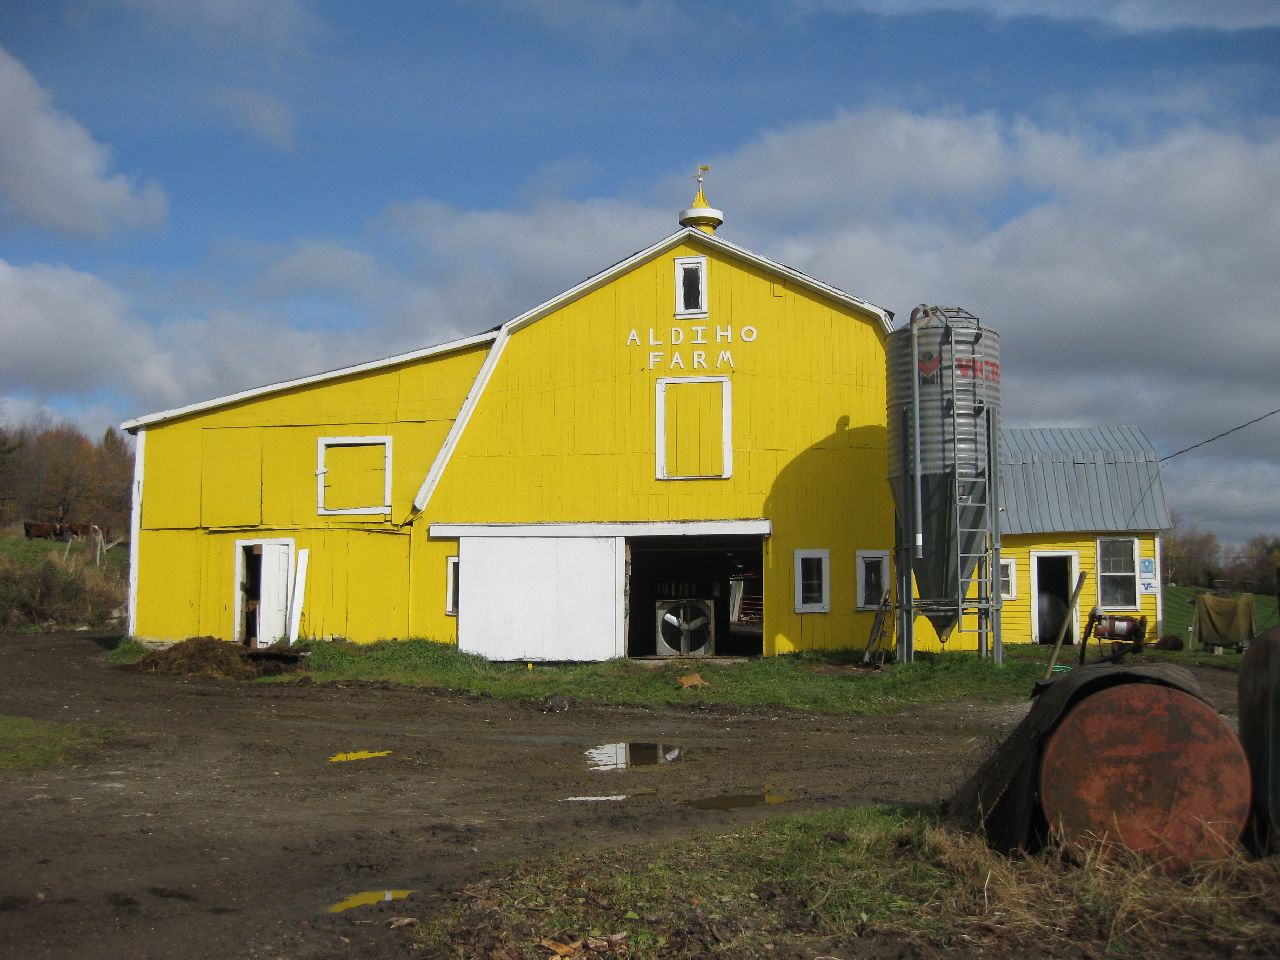 Ground Stable Barn